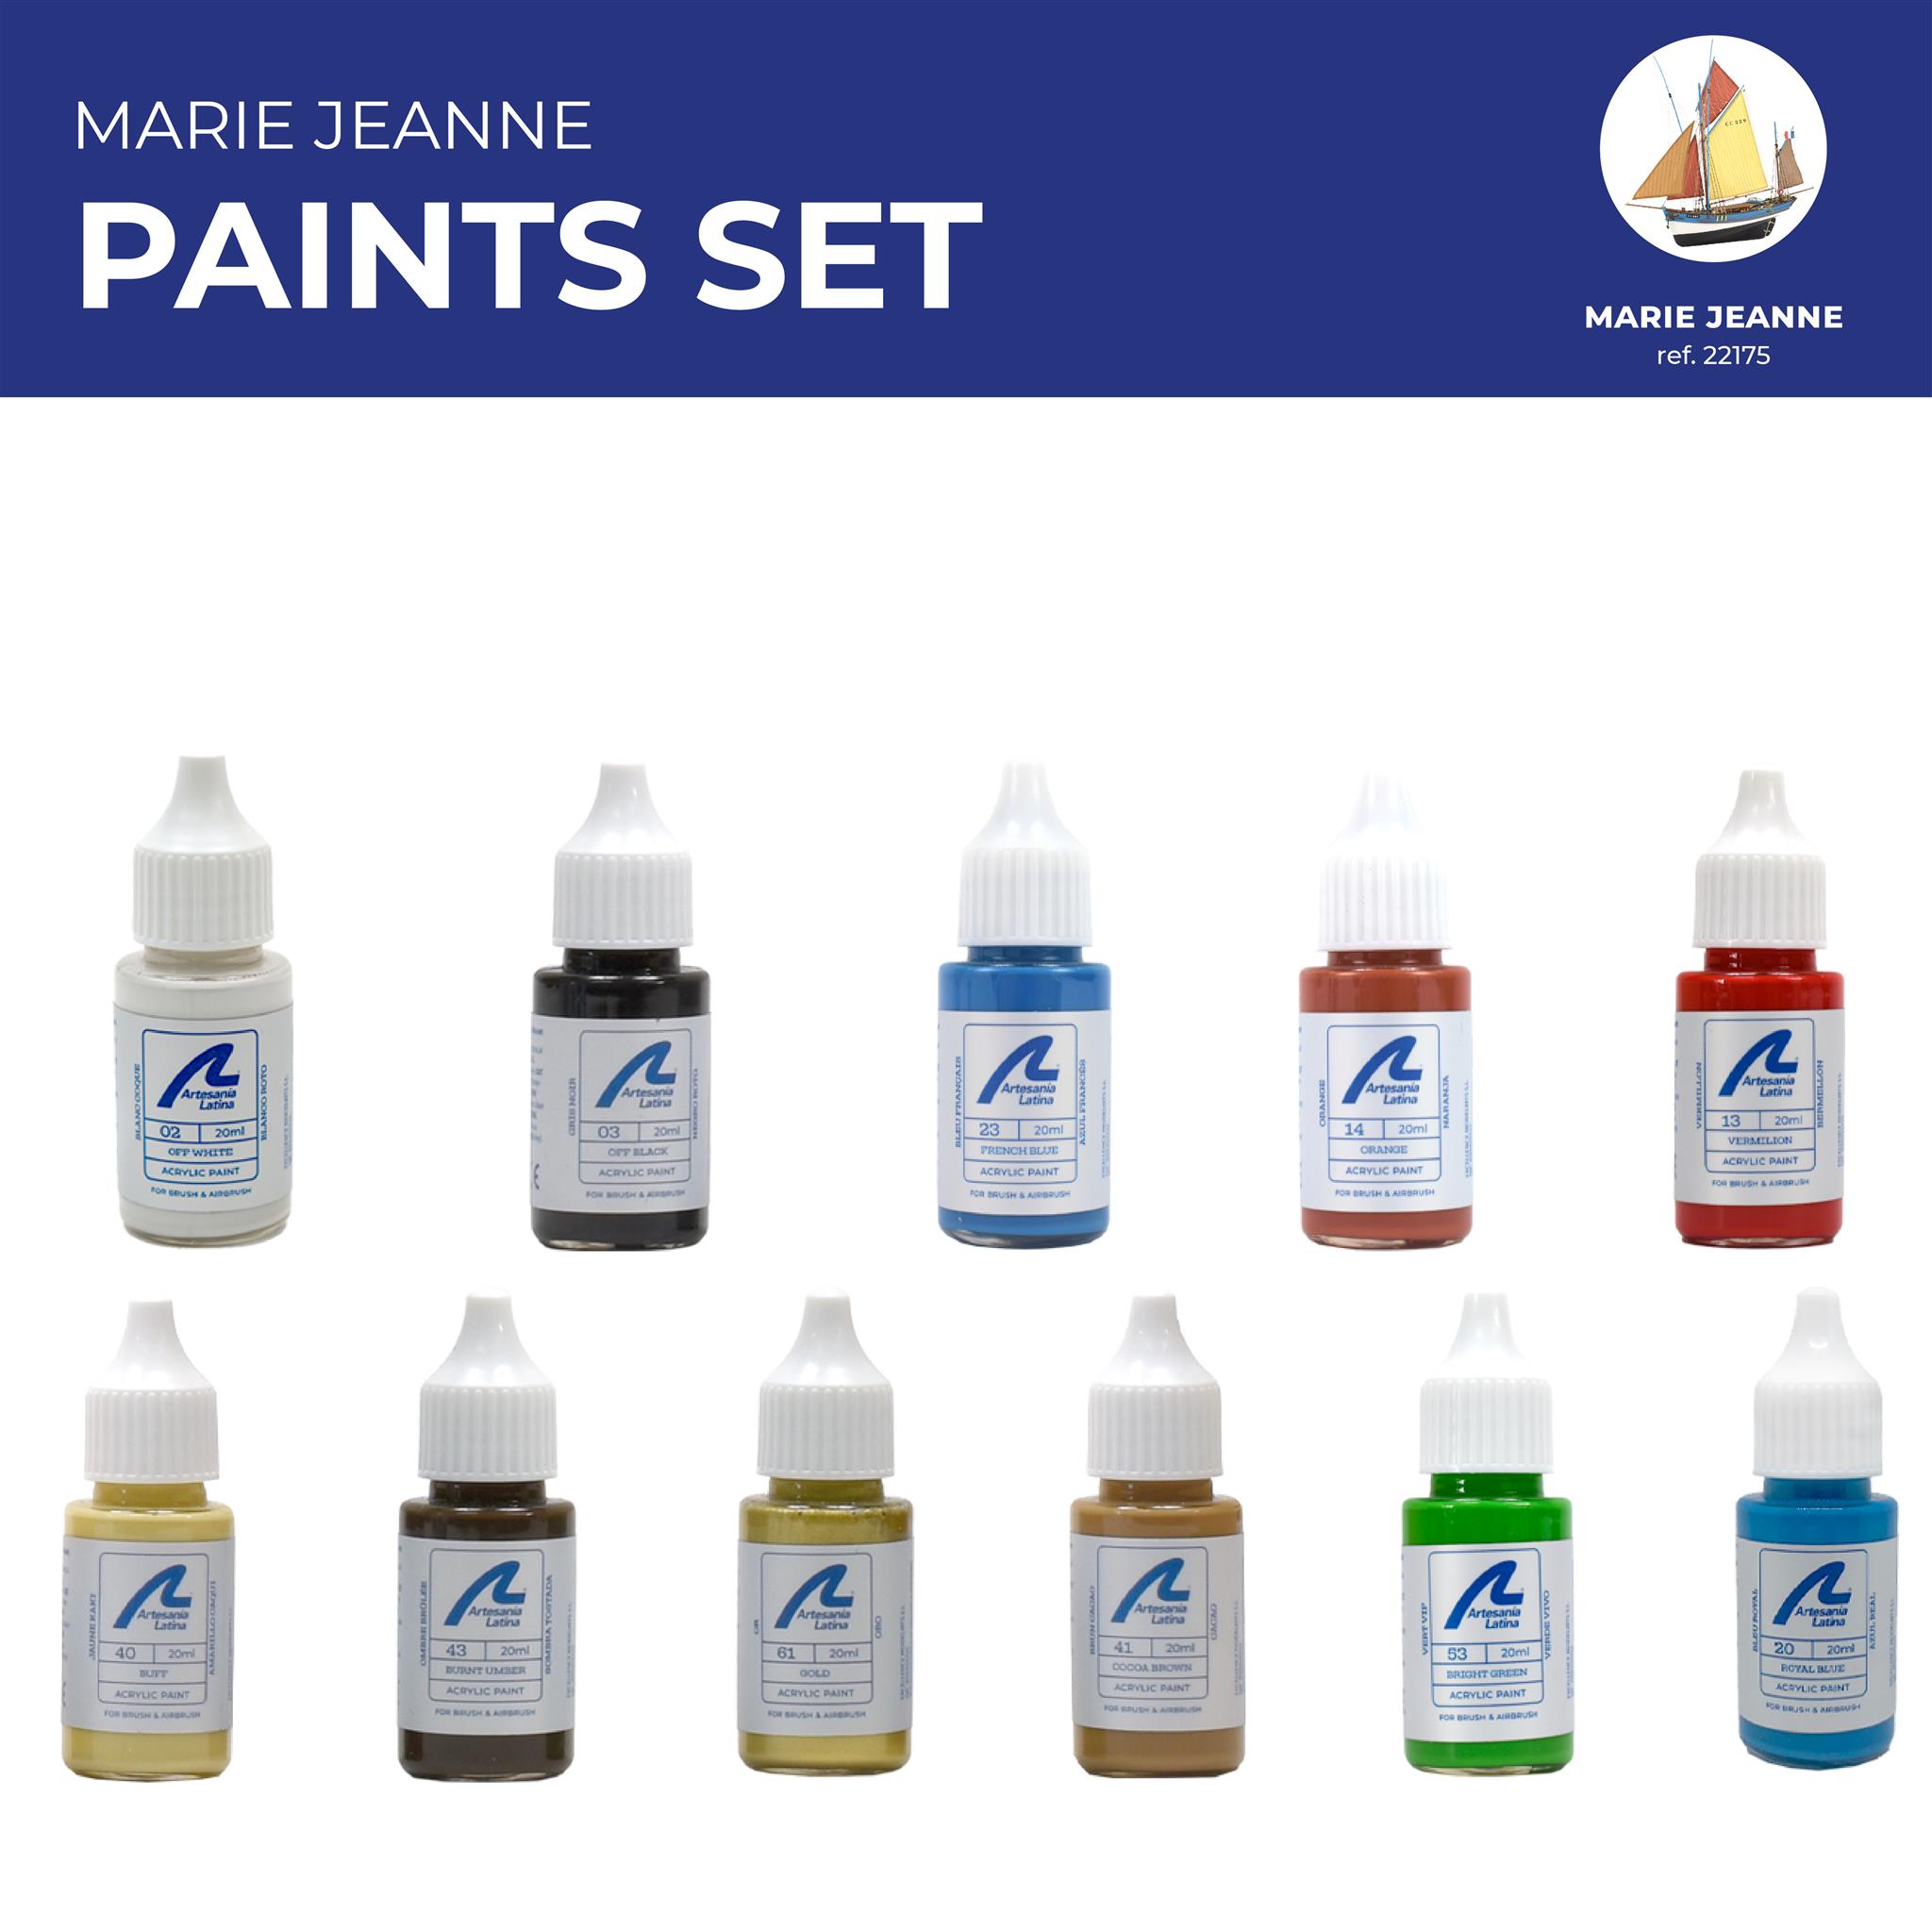 Acrylic Paints Set for Marie Jeanne Tuna Boat Model (277PACK12) made by Artesanía Latina.